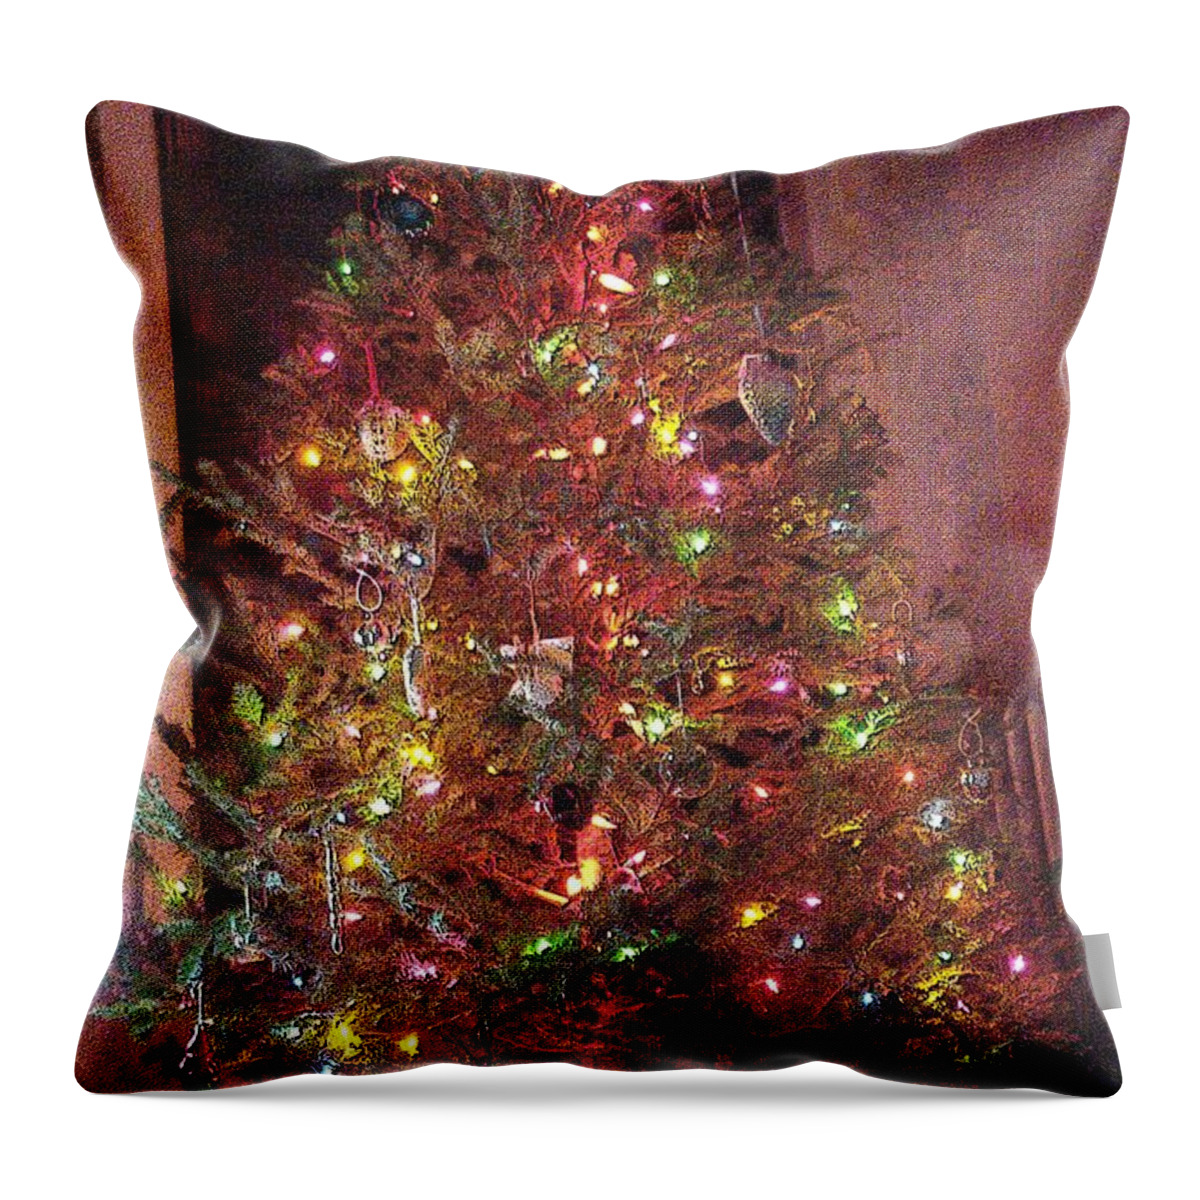 Red Throw Pillow featuring the photograph Christmas Tree Memories, Red by Carol Whaley Addassi